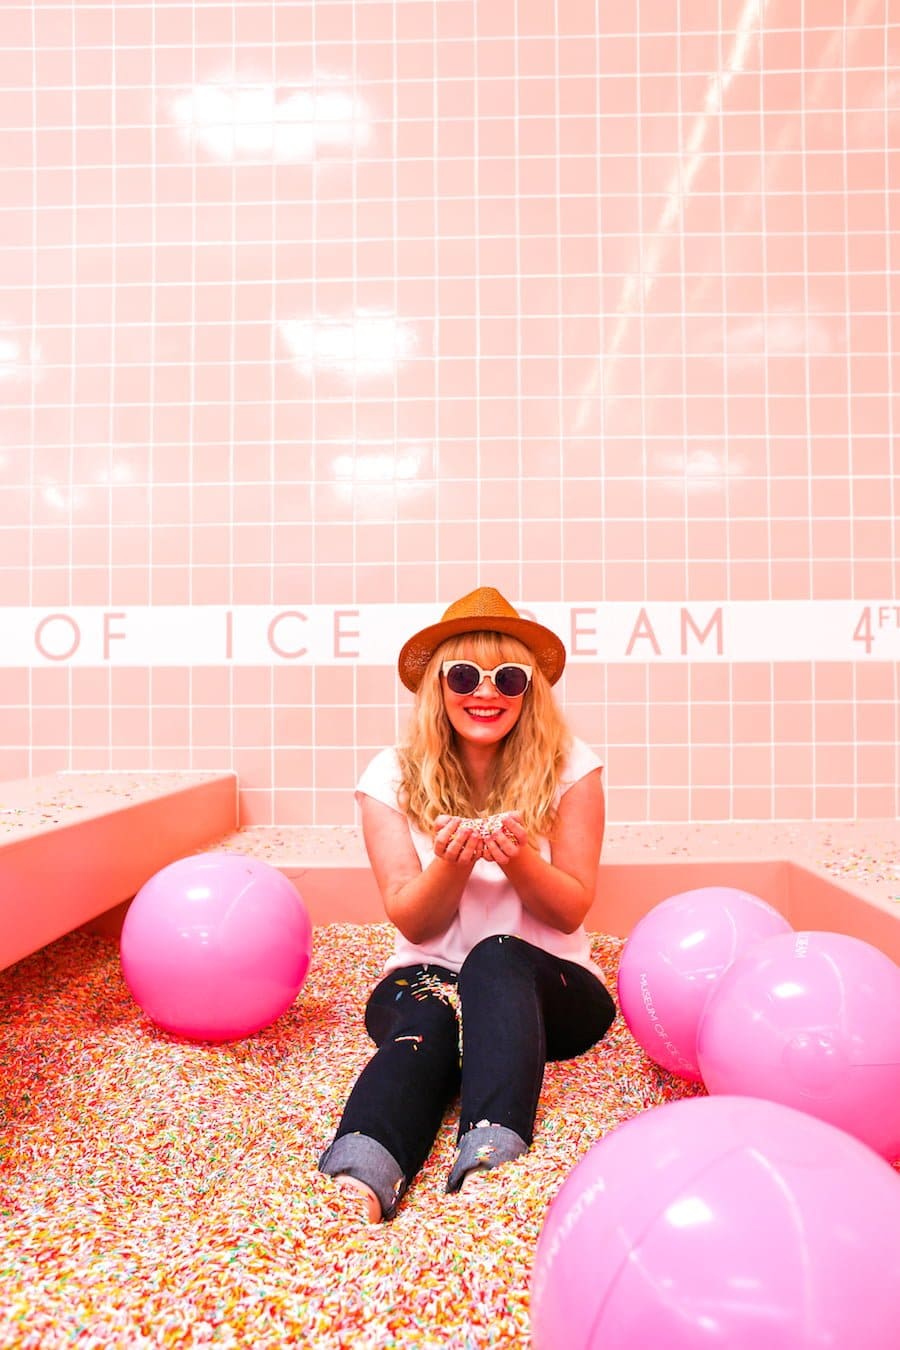 Museum of Ice Cream // Salty Canary 